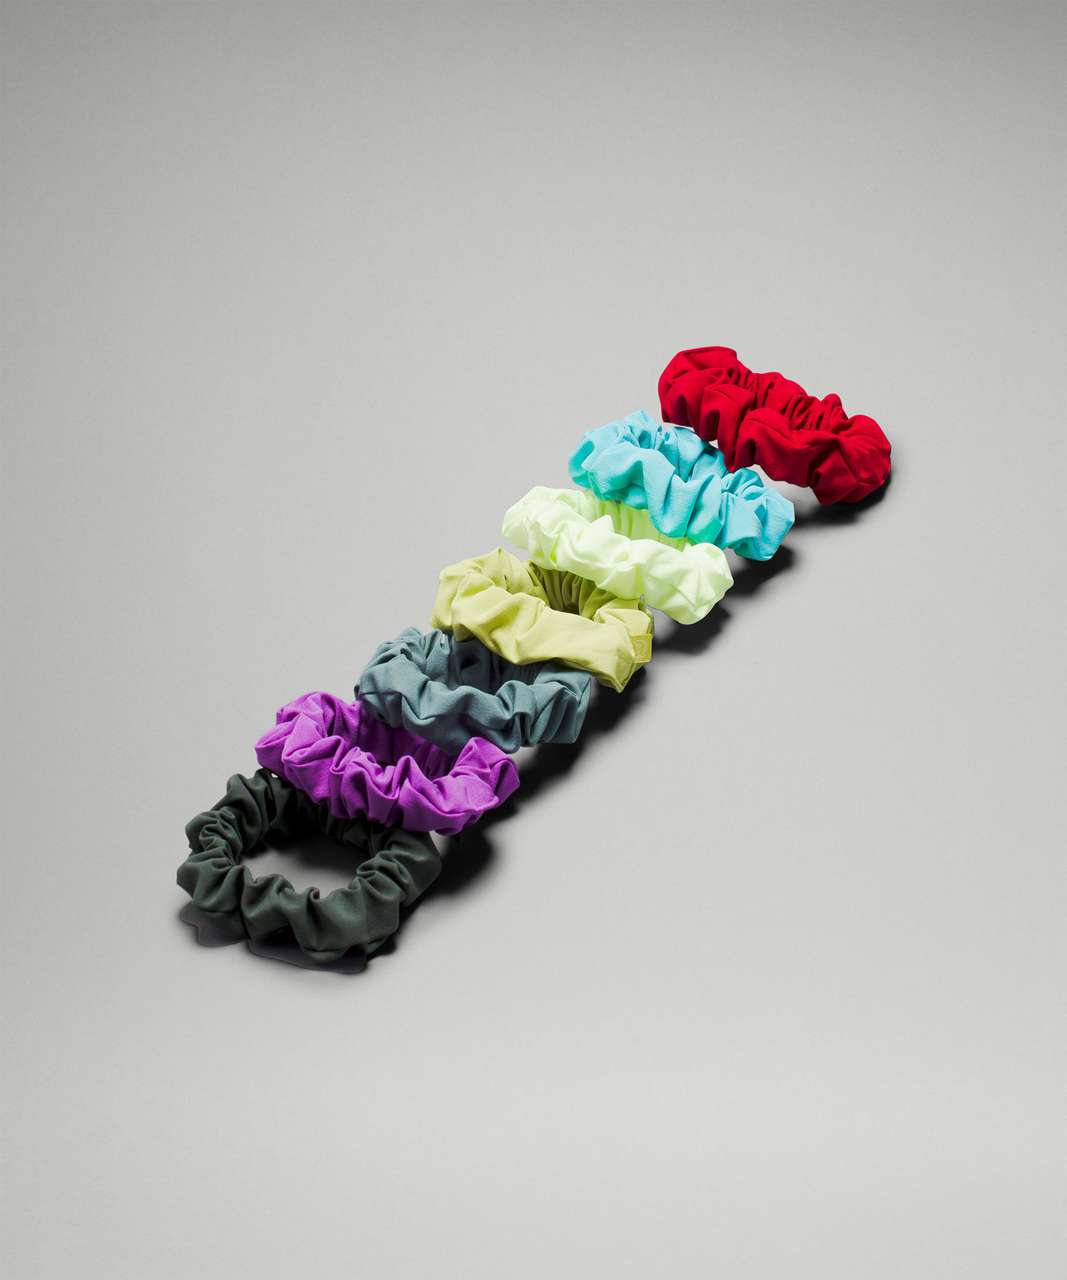 Lululemon Uplifting Scrunchie 7 Pack - Smoked Spruce / Moonlit Magenta / Tidewater Teal / Wasabi / Faded Zap / Electric Turquoise / Dark Red